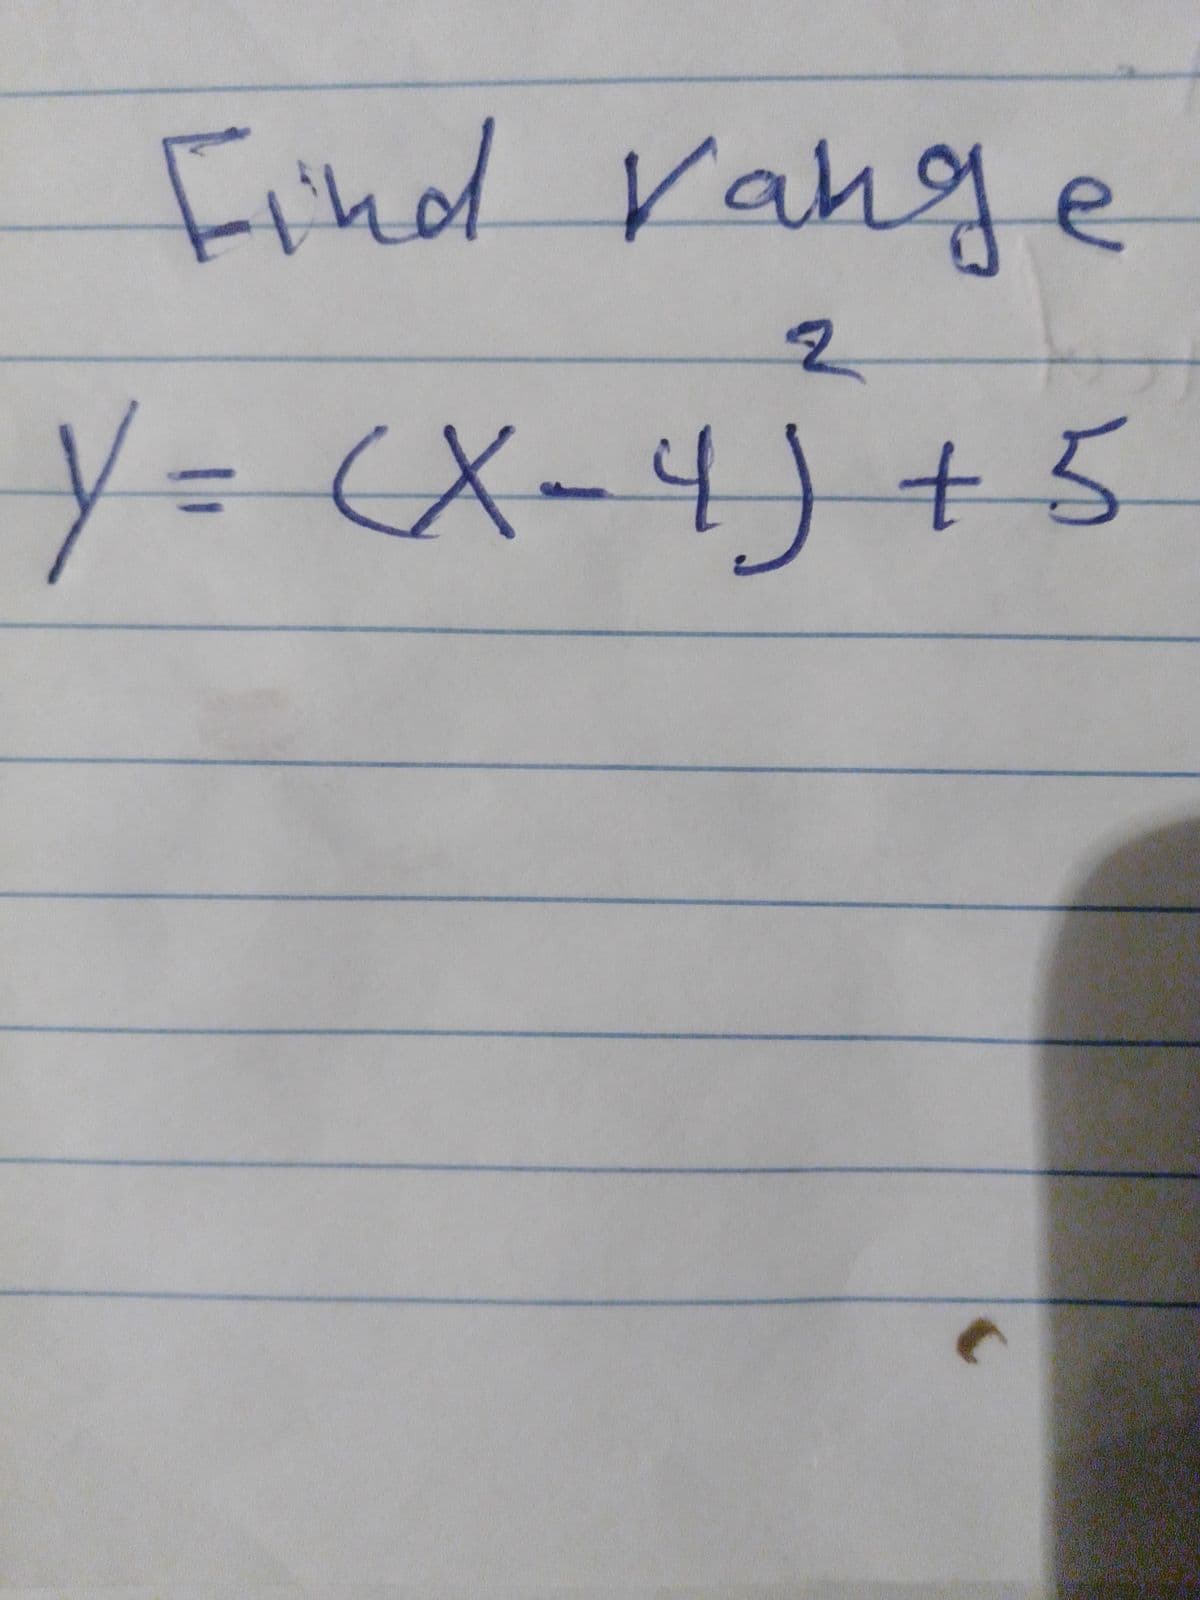 Find rahge
hod
of
y= CX-4) + 5
